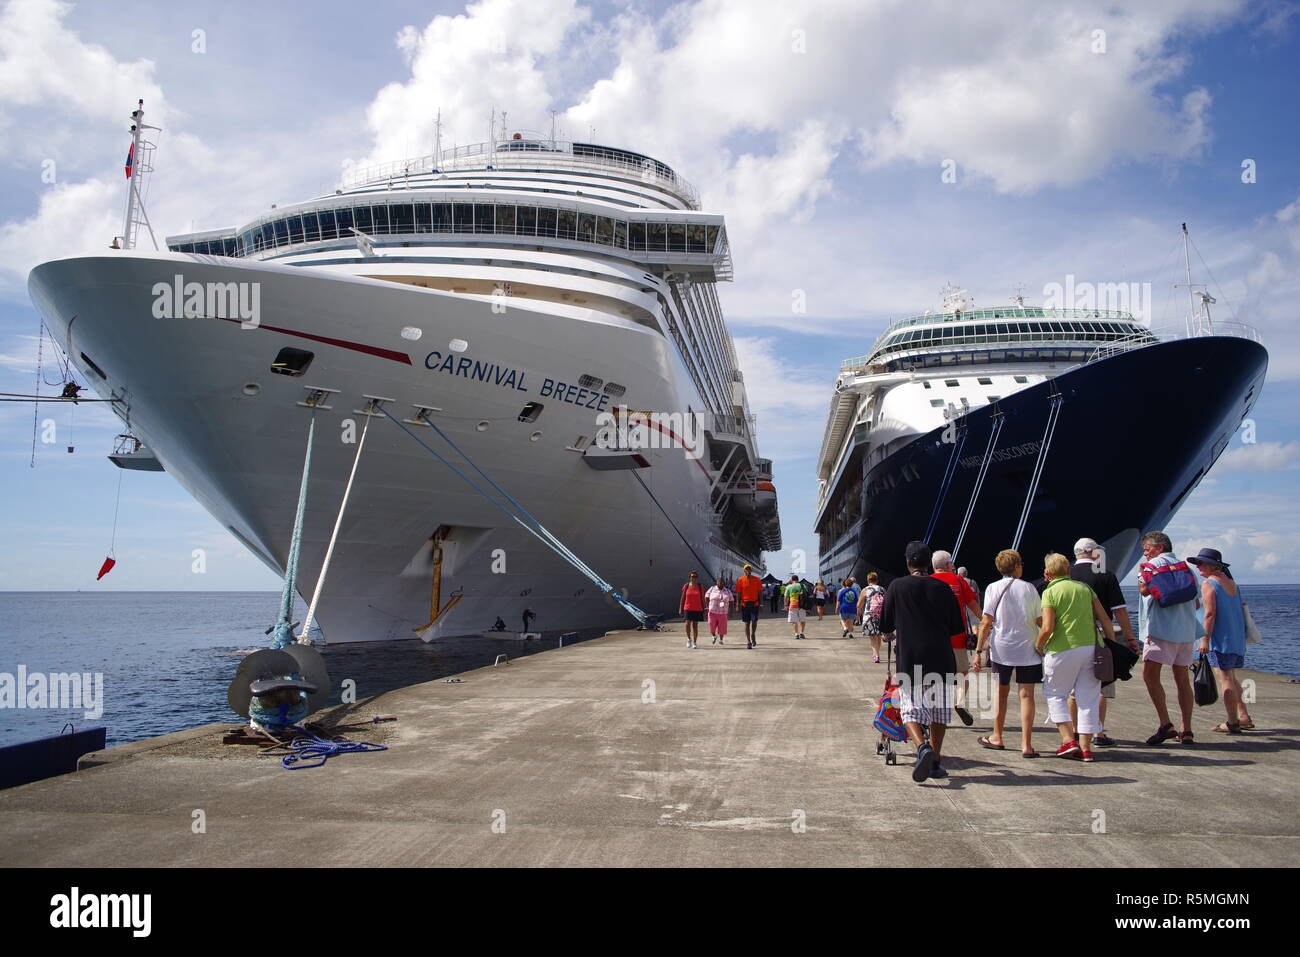 Carnival Breeze and Marella Discovery 2 docked / moored at the quay in  Grenada, Caribbean Island Nation Stock Photo - Alamy